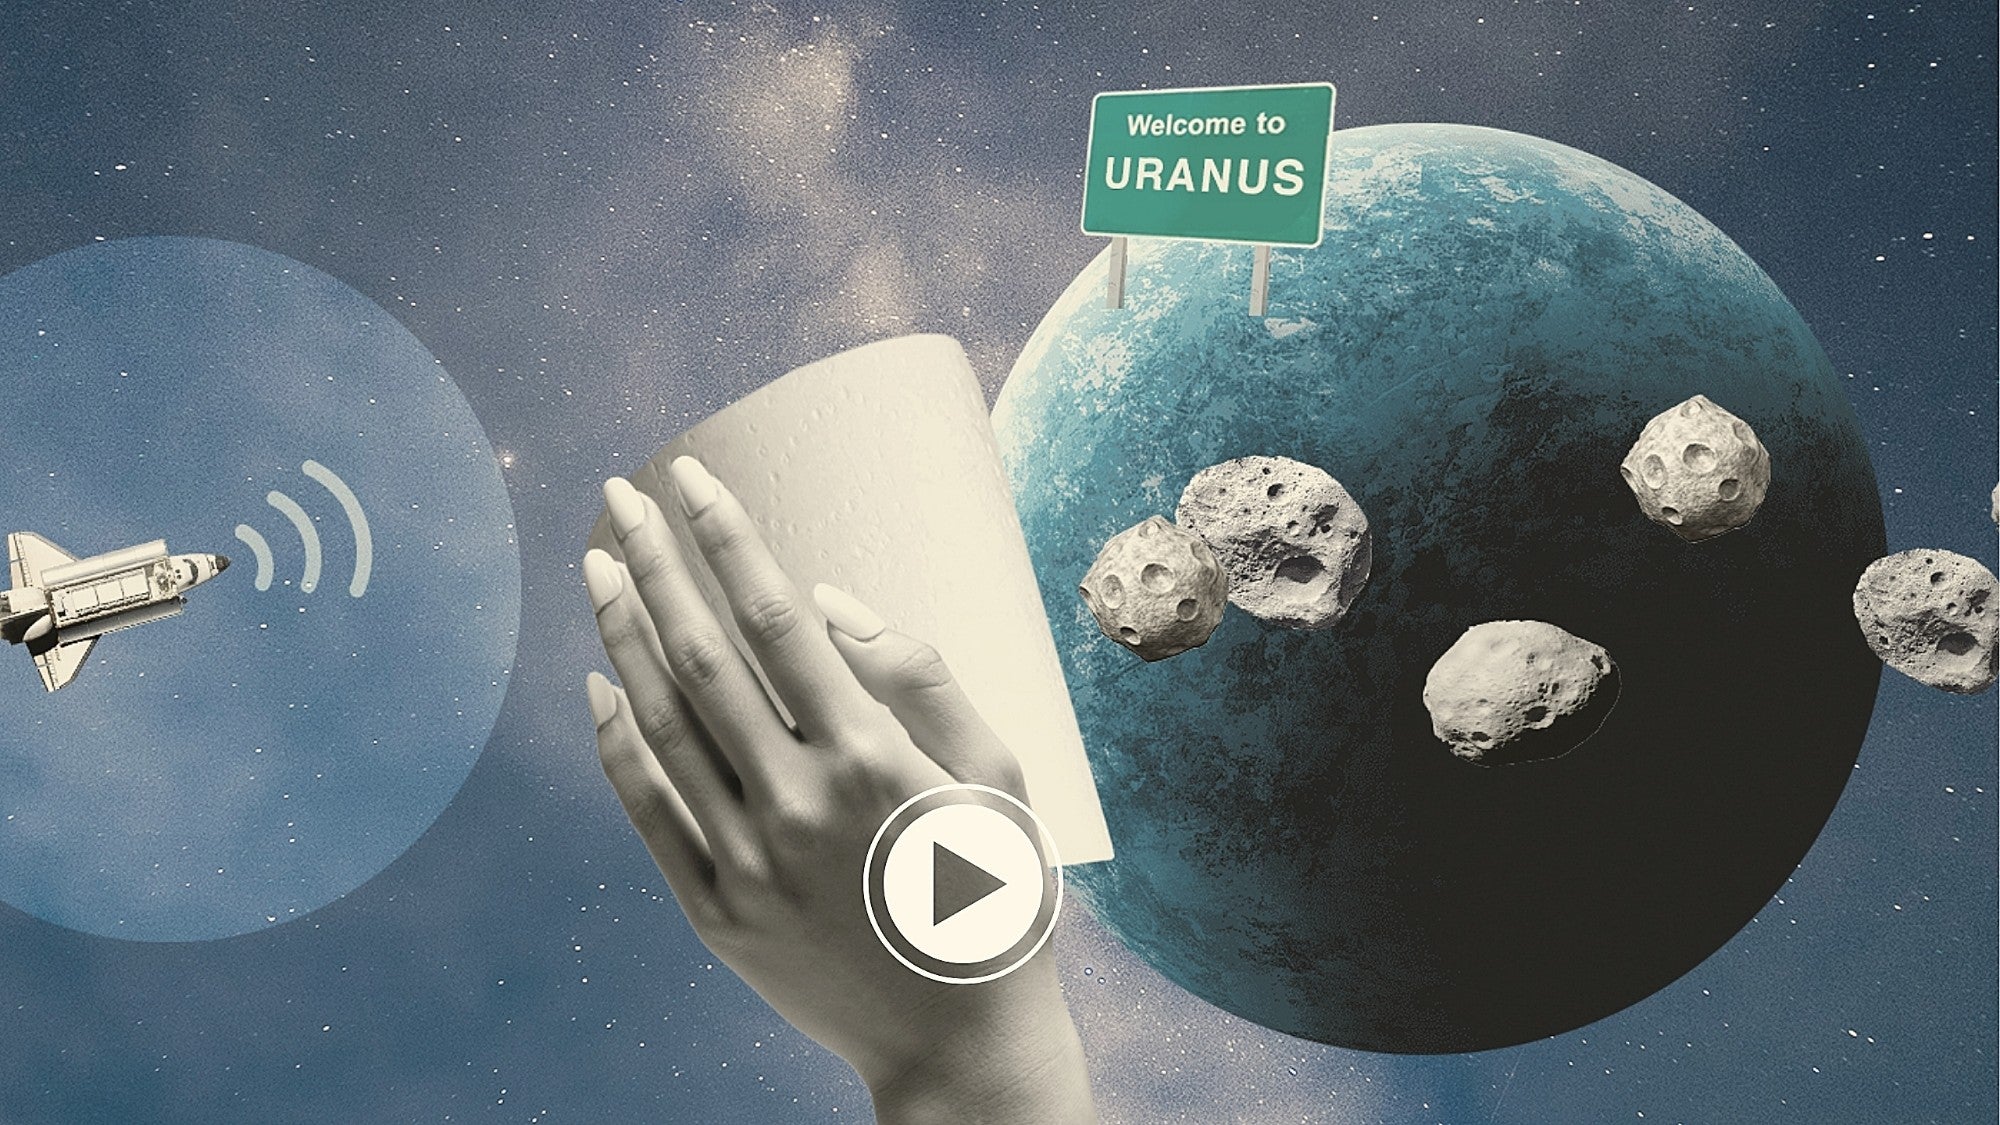 Welcome to Uranus sign with toilet paper in female hands